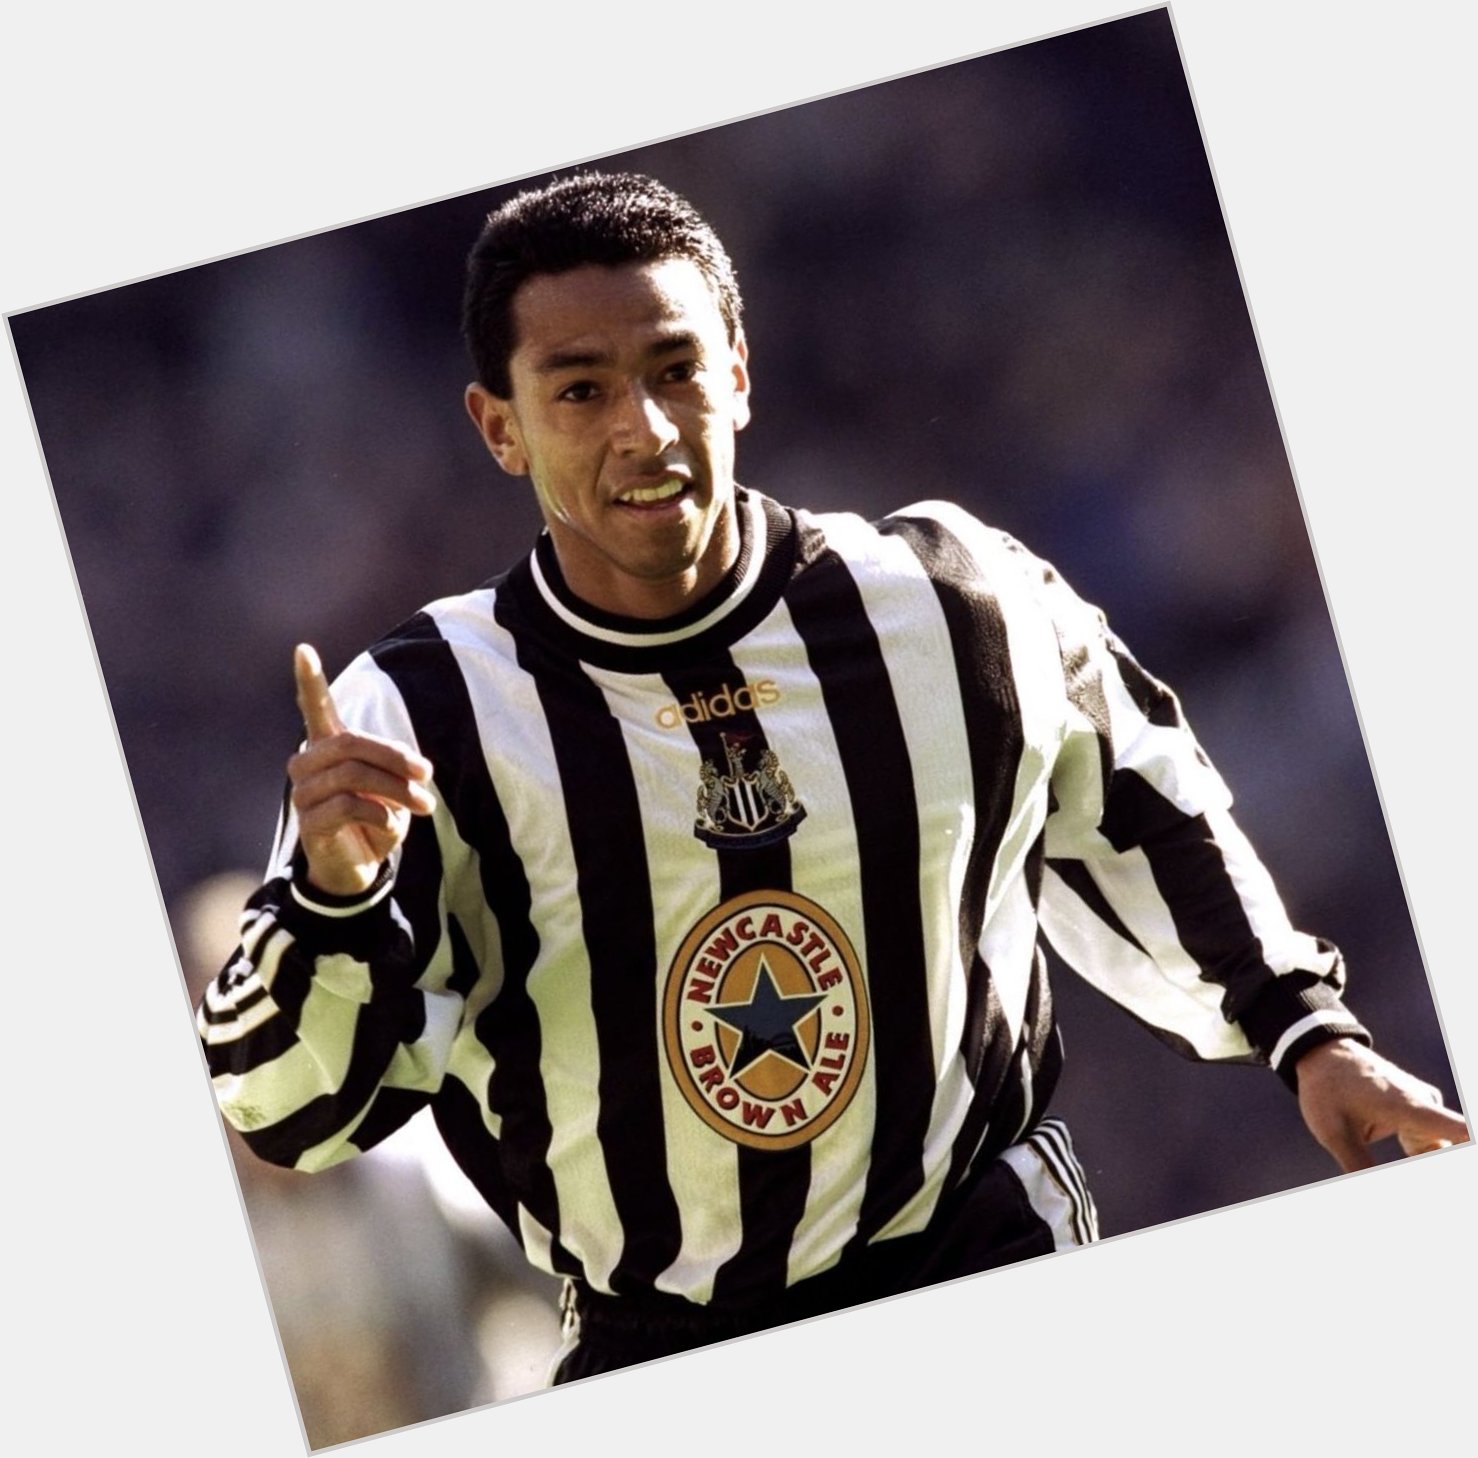 A very happy birthday to legend, and quite famous trumpet advocate, Nolberto Solano. 